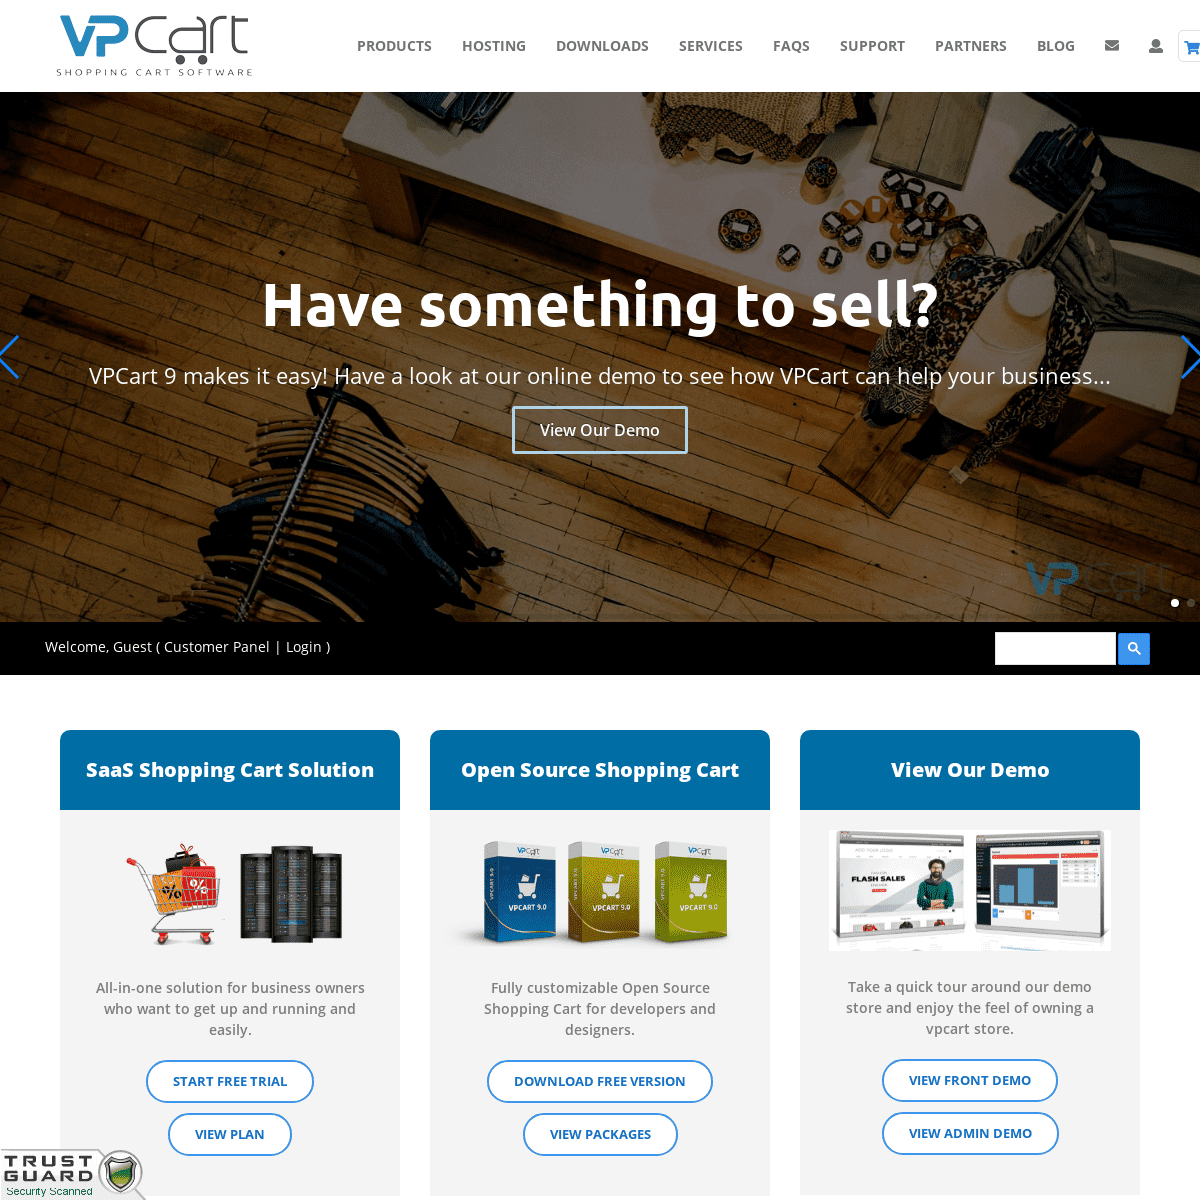 A complete backup of https://vpcart.com